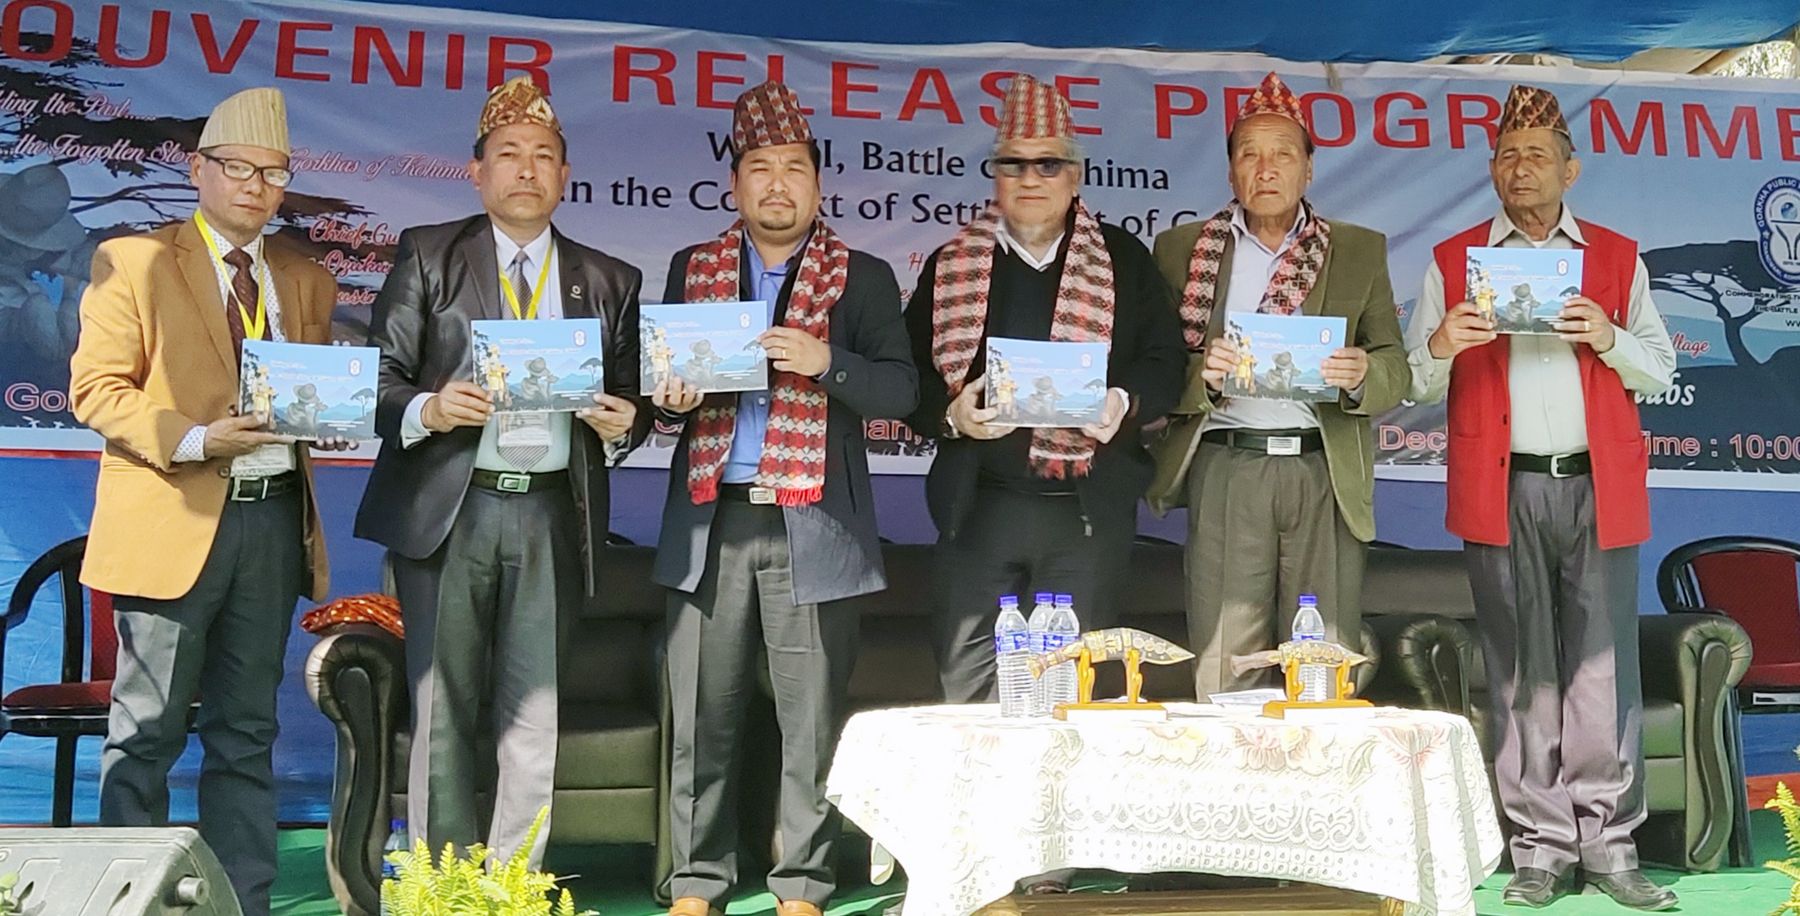 Tongpang Ozukum, Dr. Neikiesalie Kire, Thepfuvilie Suohu and GPPK officials during the release of souvenir marking 75th year of Battle of Kohima in the context of settlement of Gorkhas on December 18. (Morung Photo)